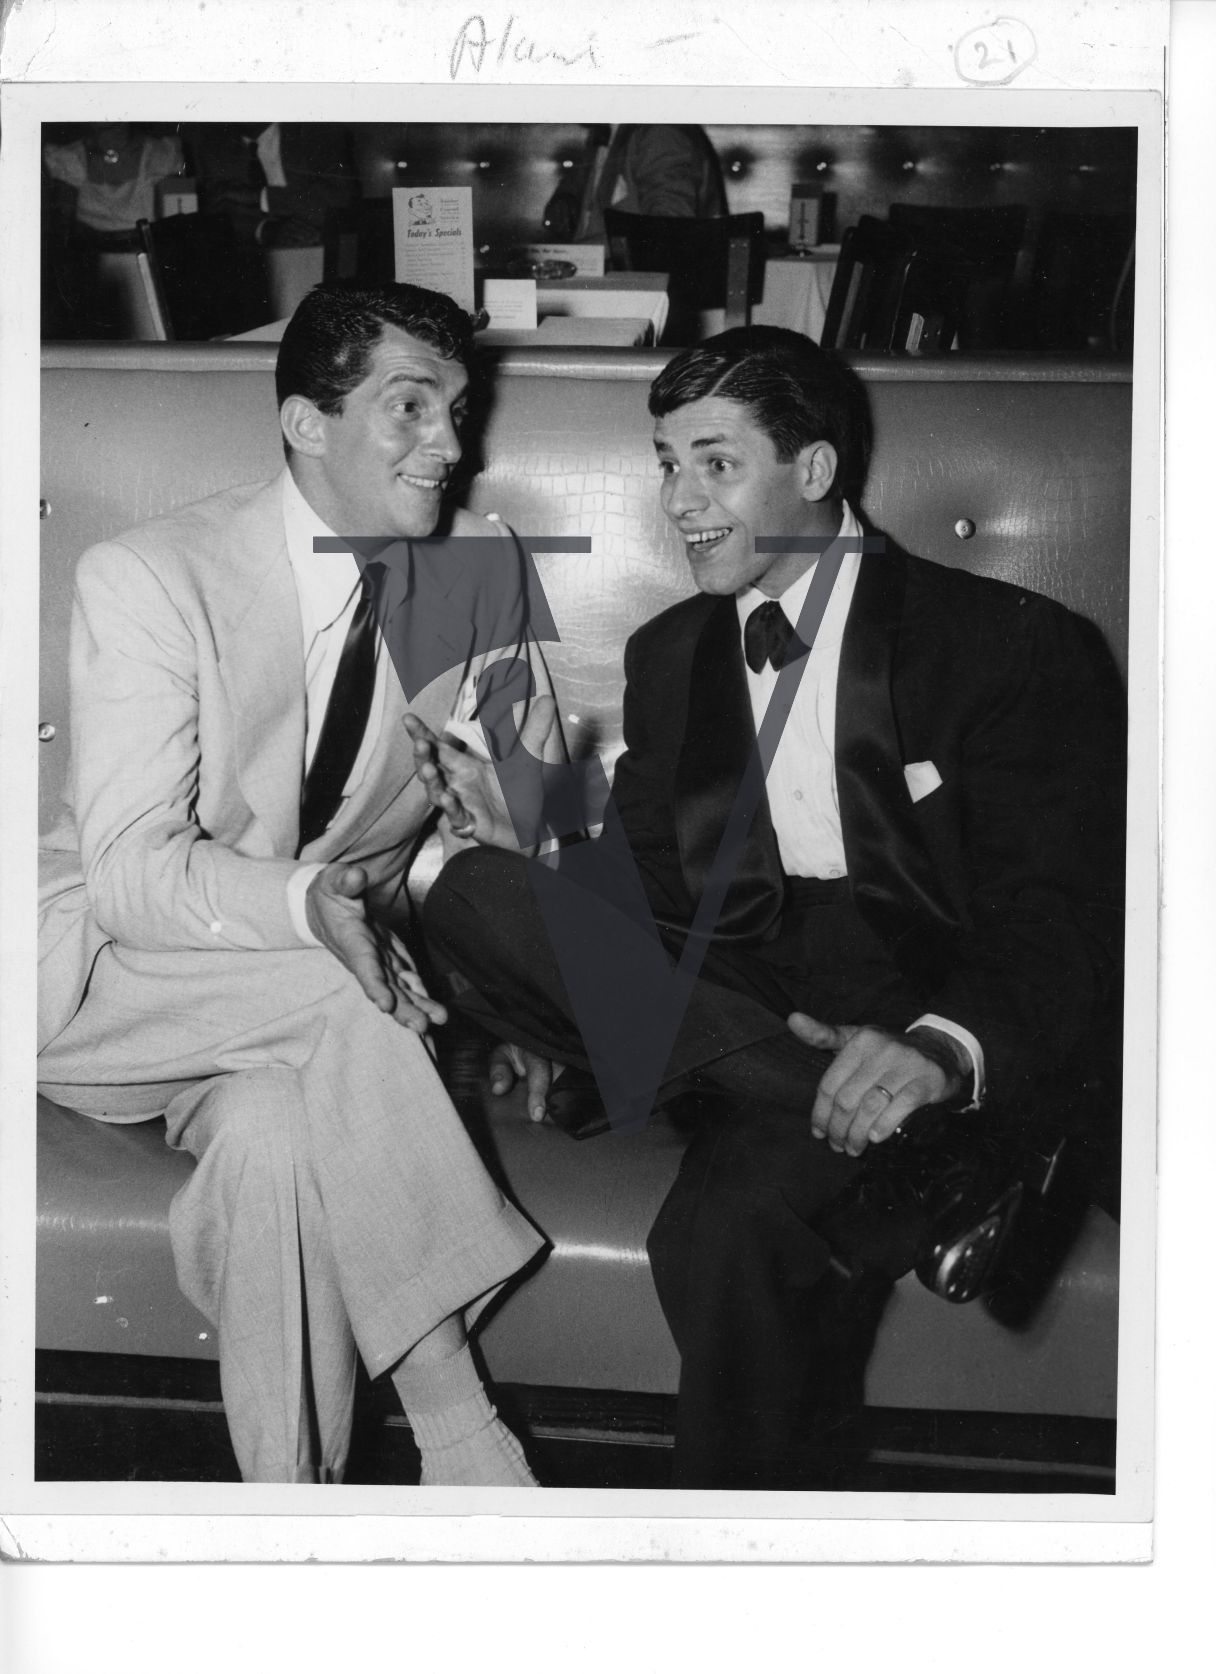 Dean Martin and Jerry Lewis, seated, portrait, full shot.